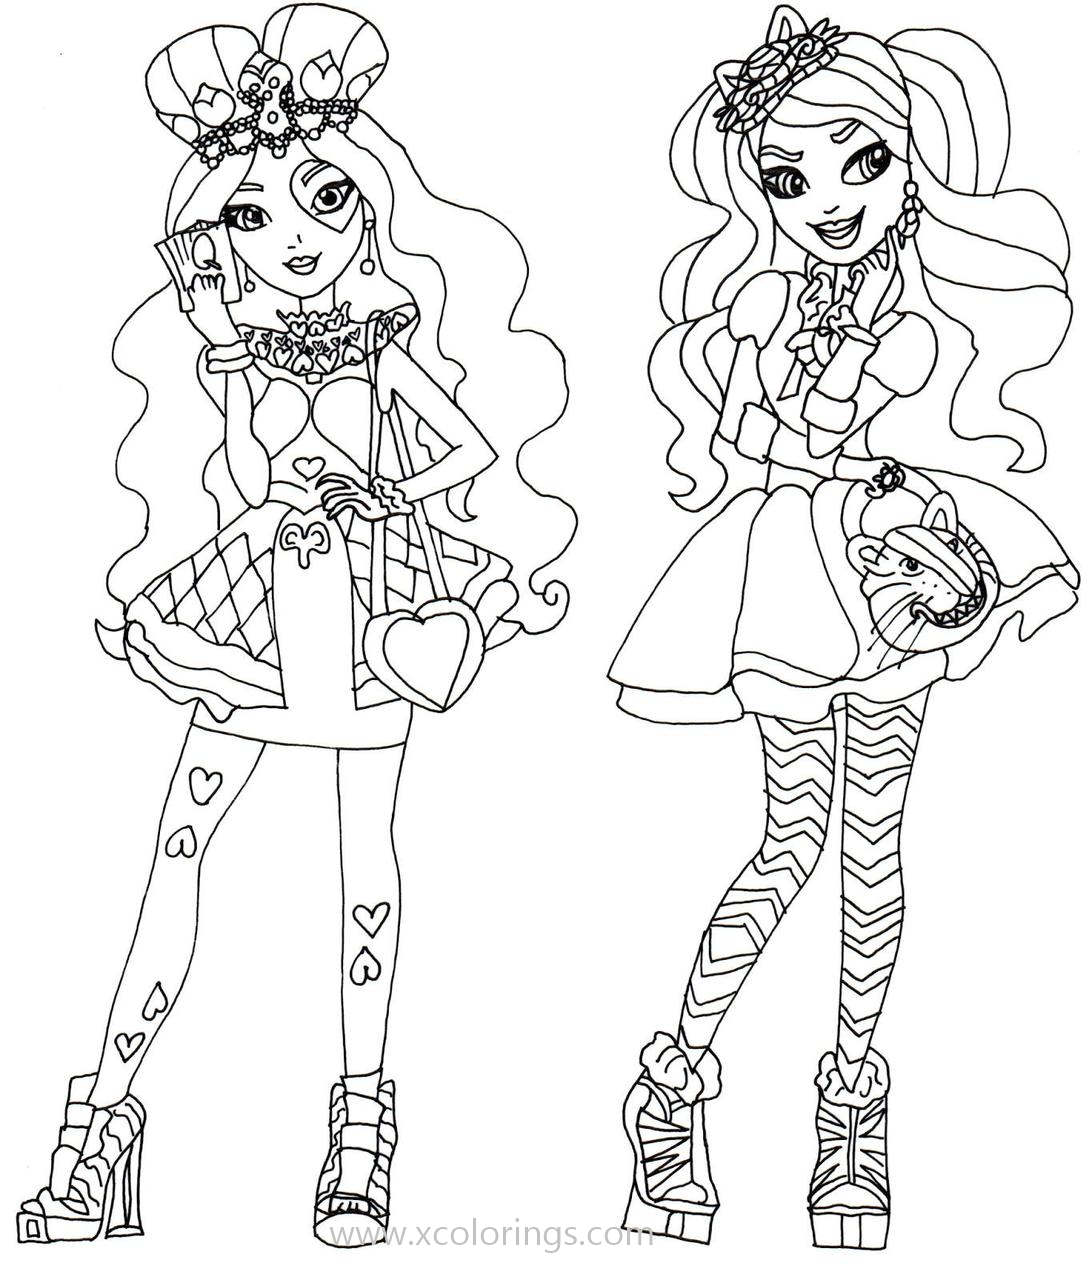 Free Ever After High Coloring Pages Lizzie Hearts and Meeshell Mermaid printable